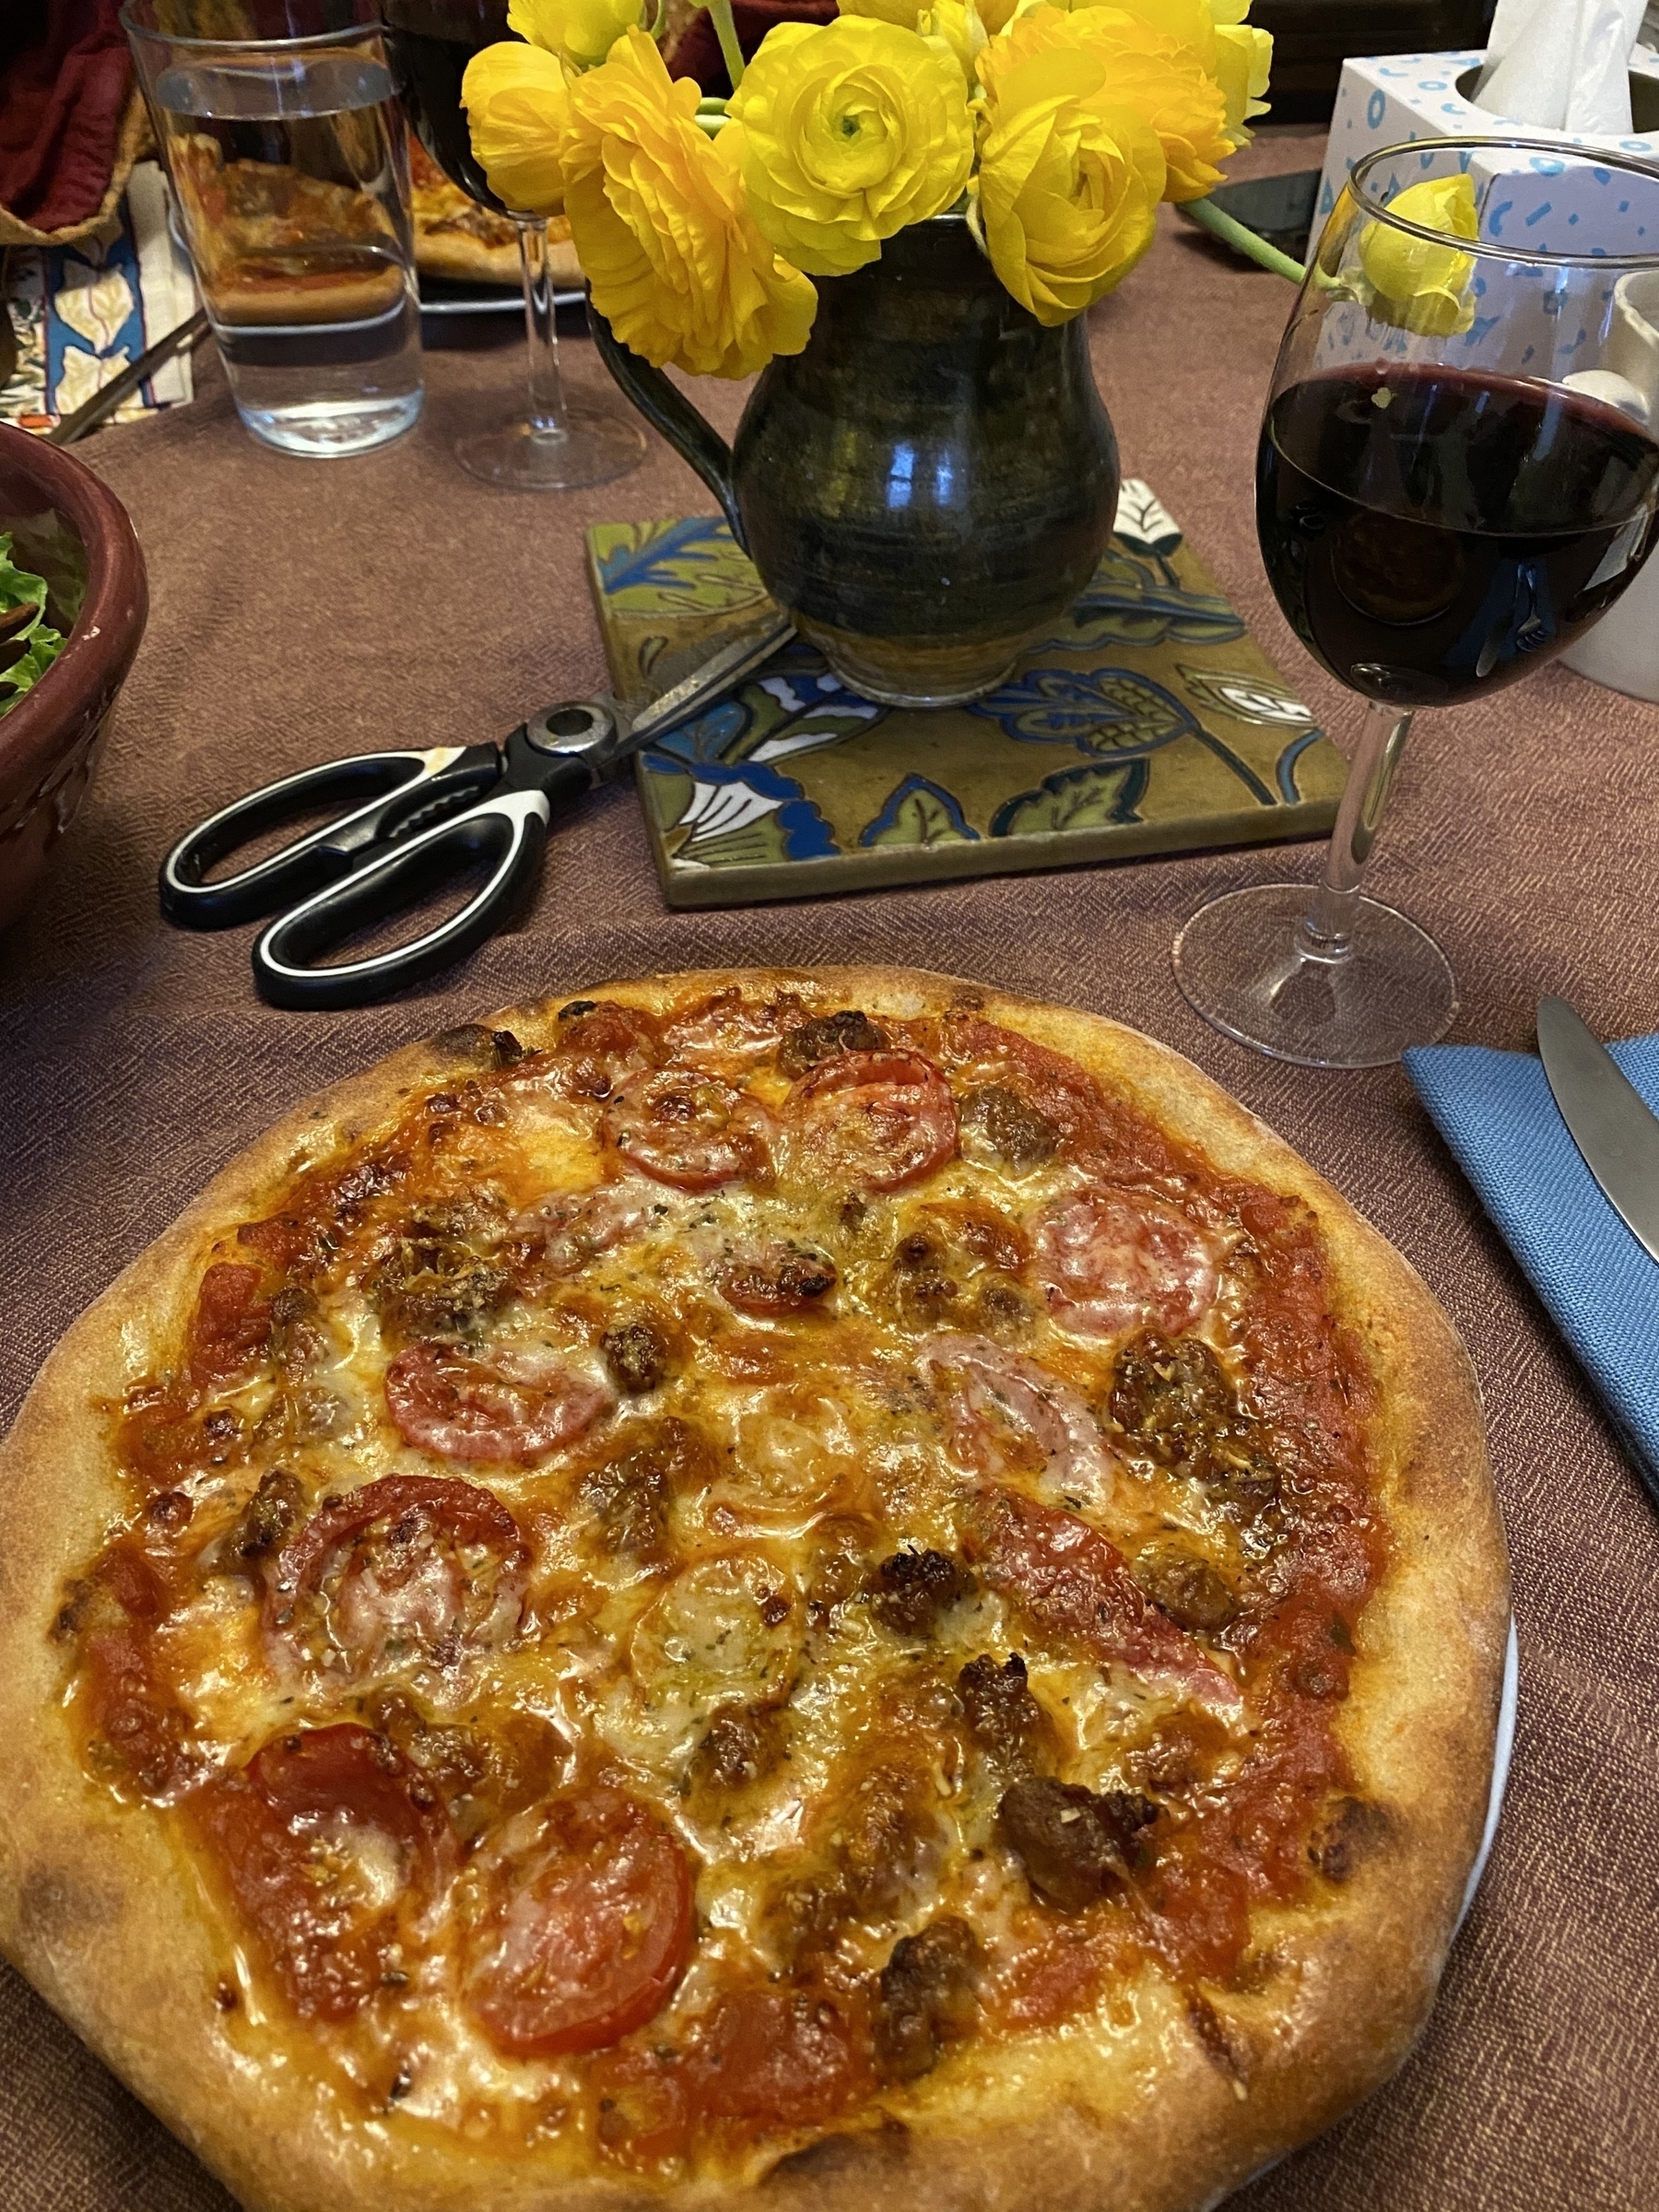 Small pizza on a plate next to a glass of wine, a vase of yellow roses, and a pair of kitchen scissors.